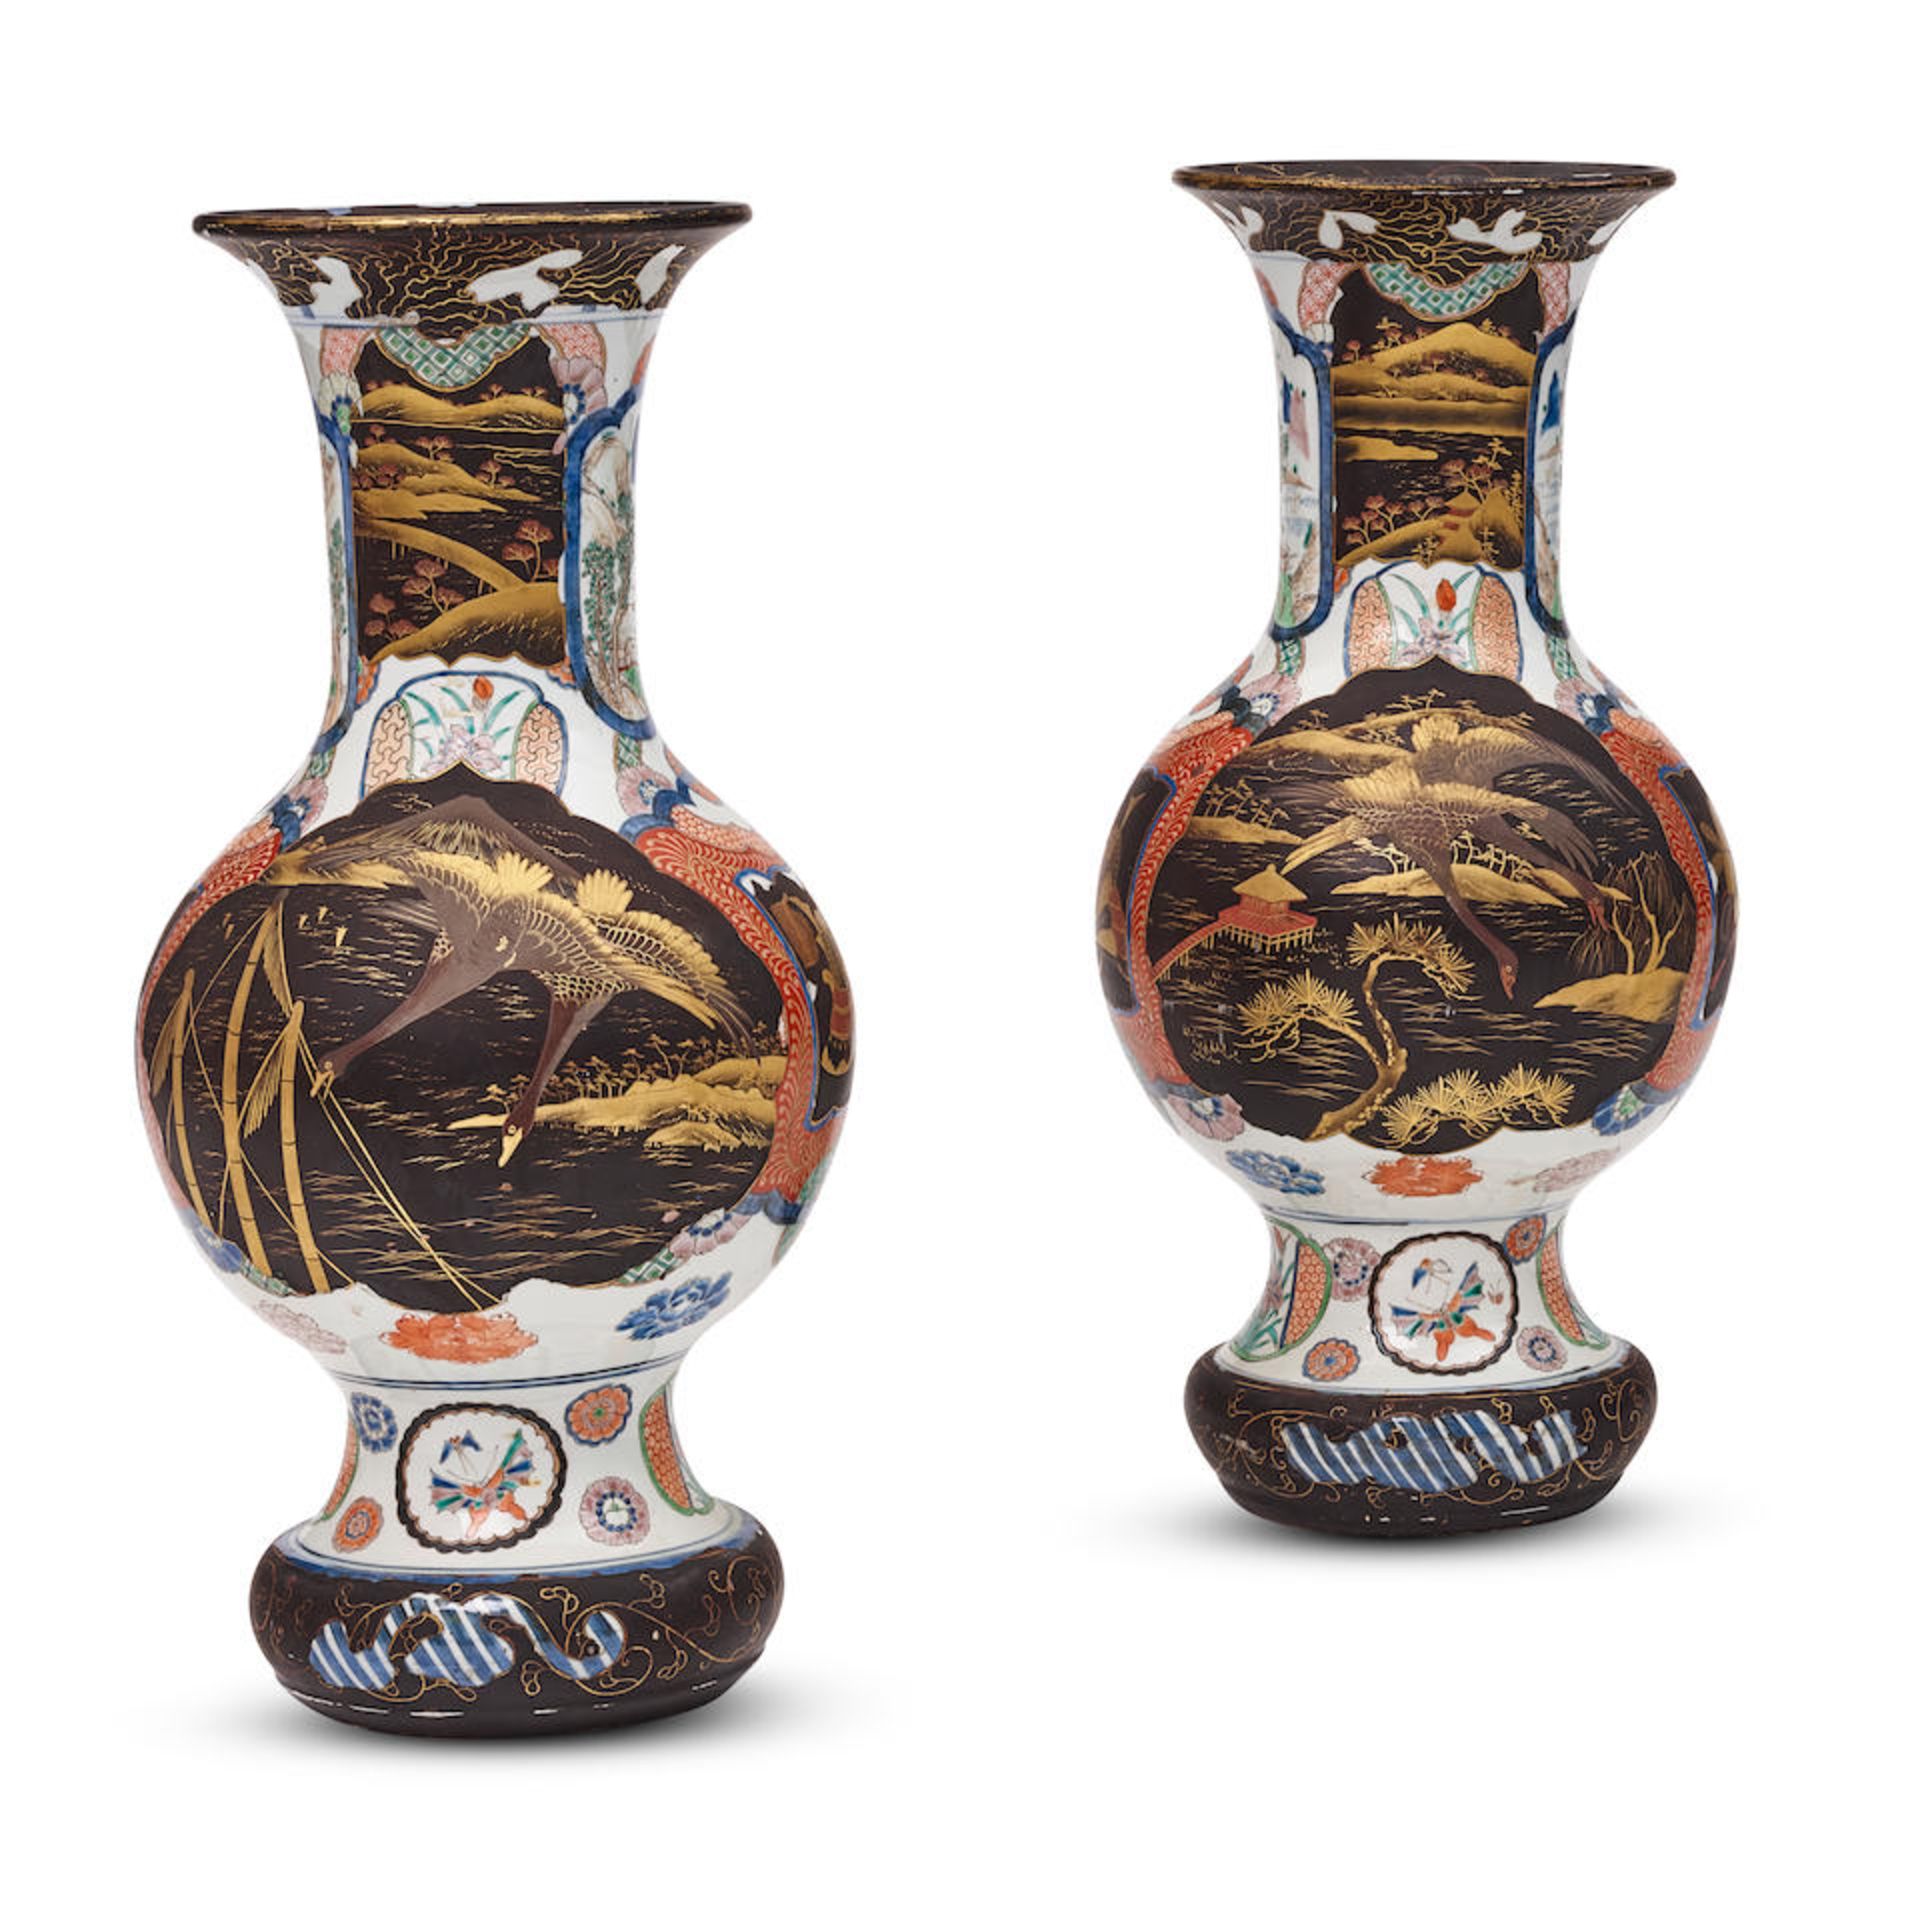 A PAIR OF JAPANESE UNDER AND OVERGLAZED PORCELAIN VASES20th century - Image 2 of 2